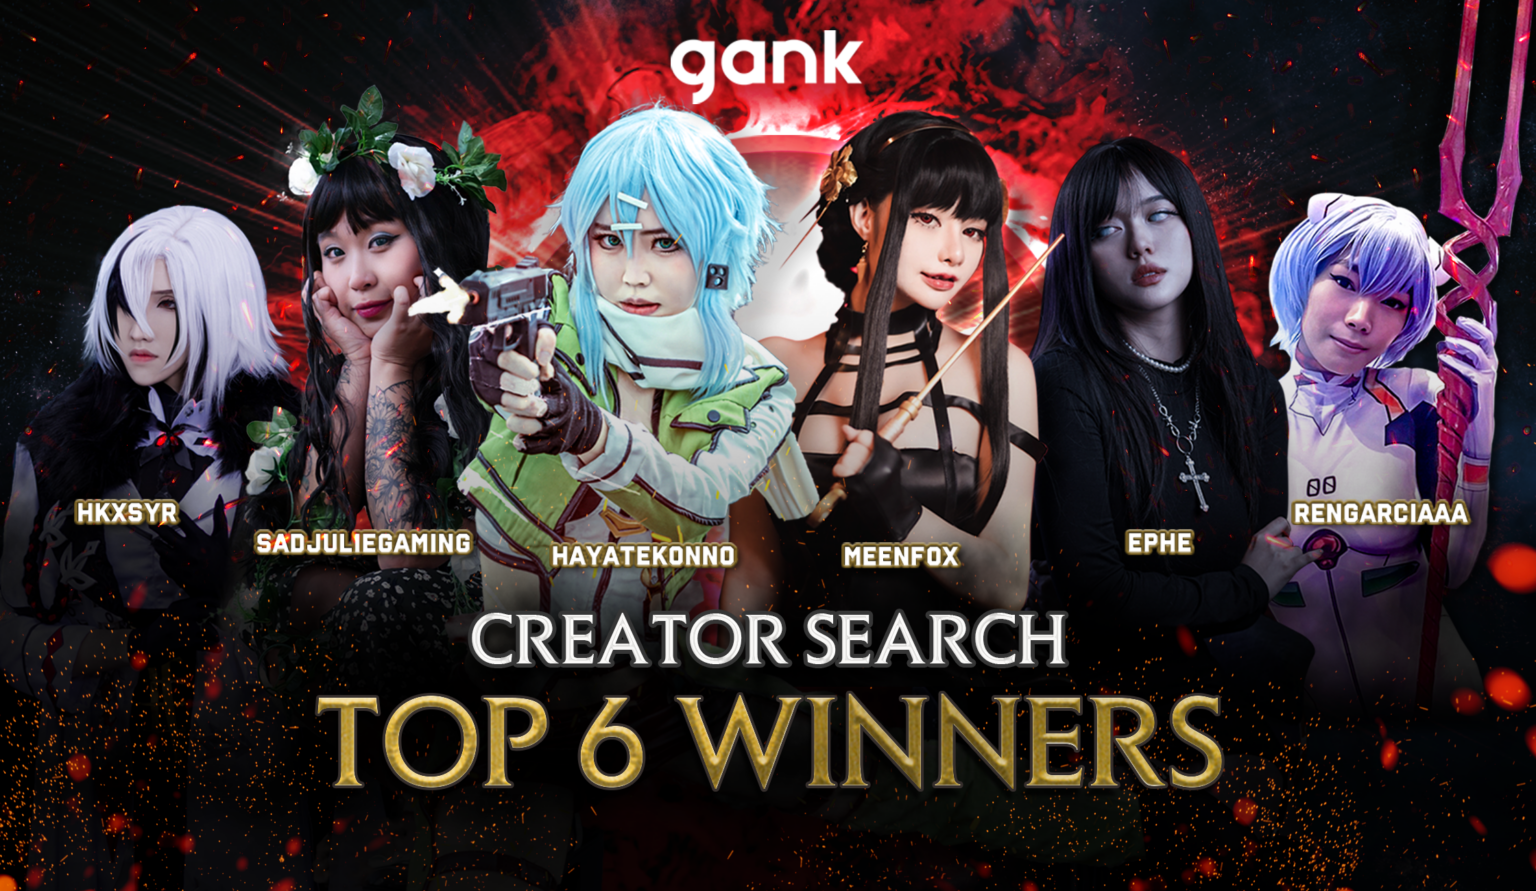 WNNERS ANNOUNCEMENT - Creator Search Campaign